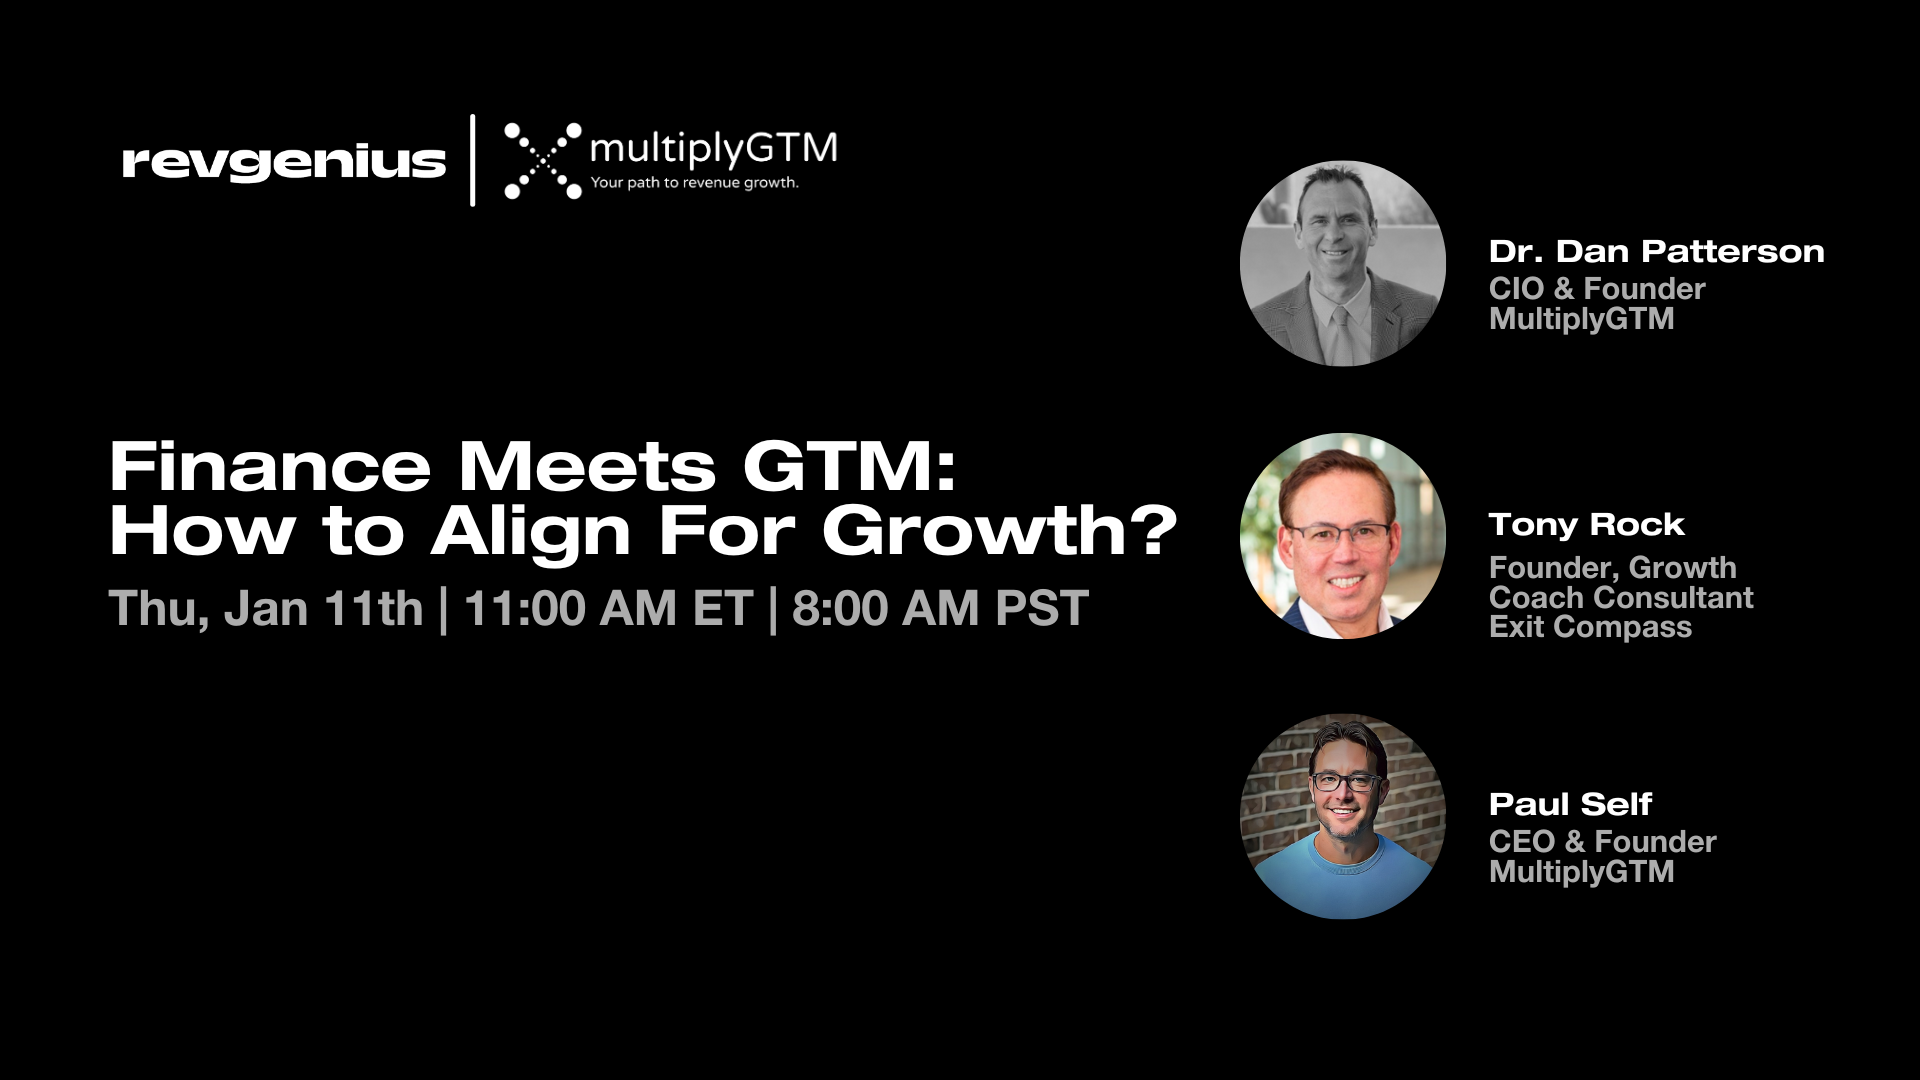 Xply_Finance Meets GTM How to Align For Growth